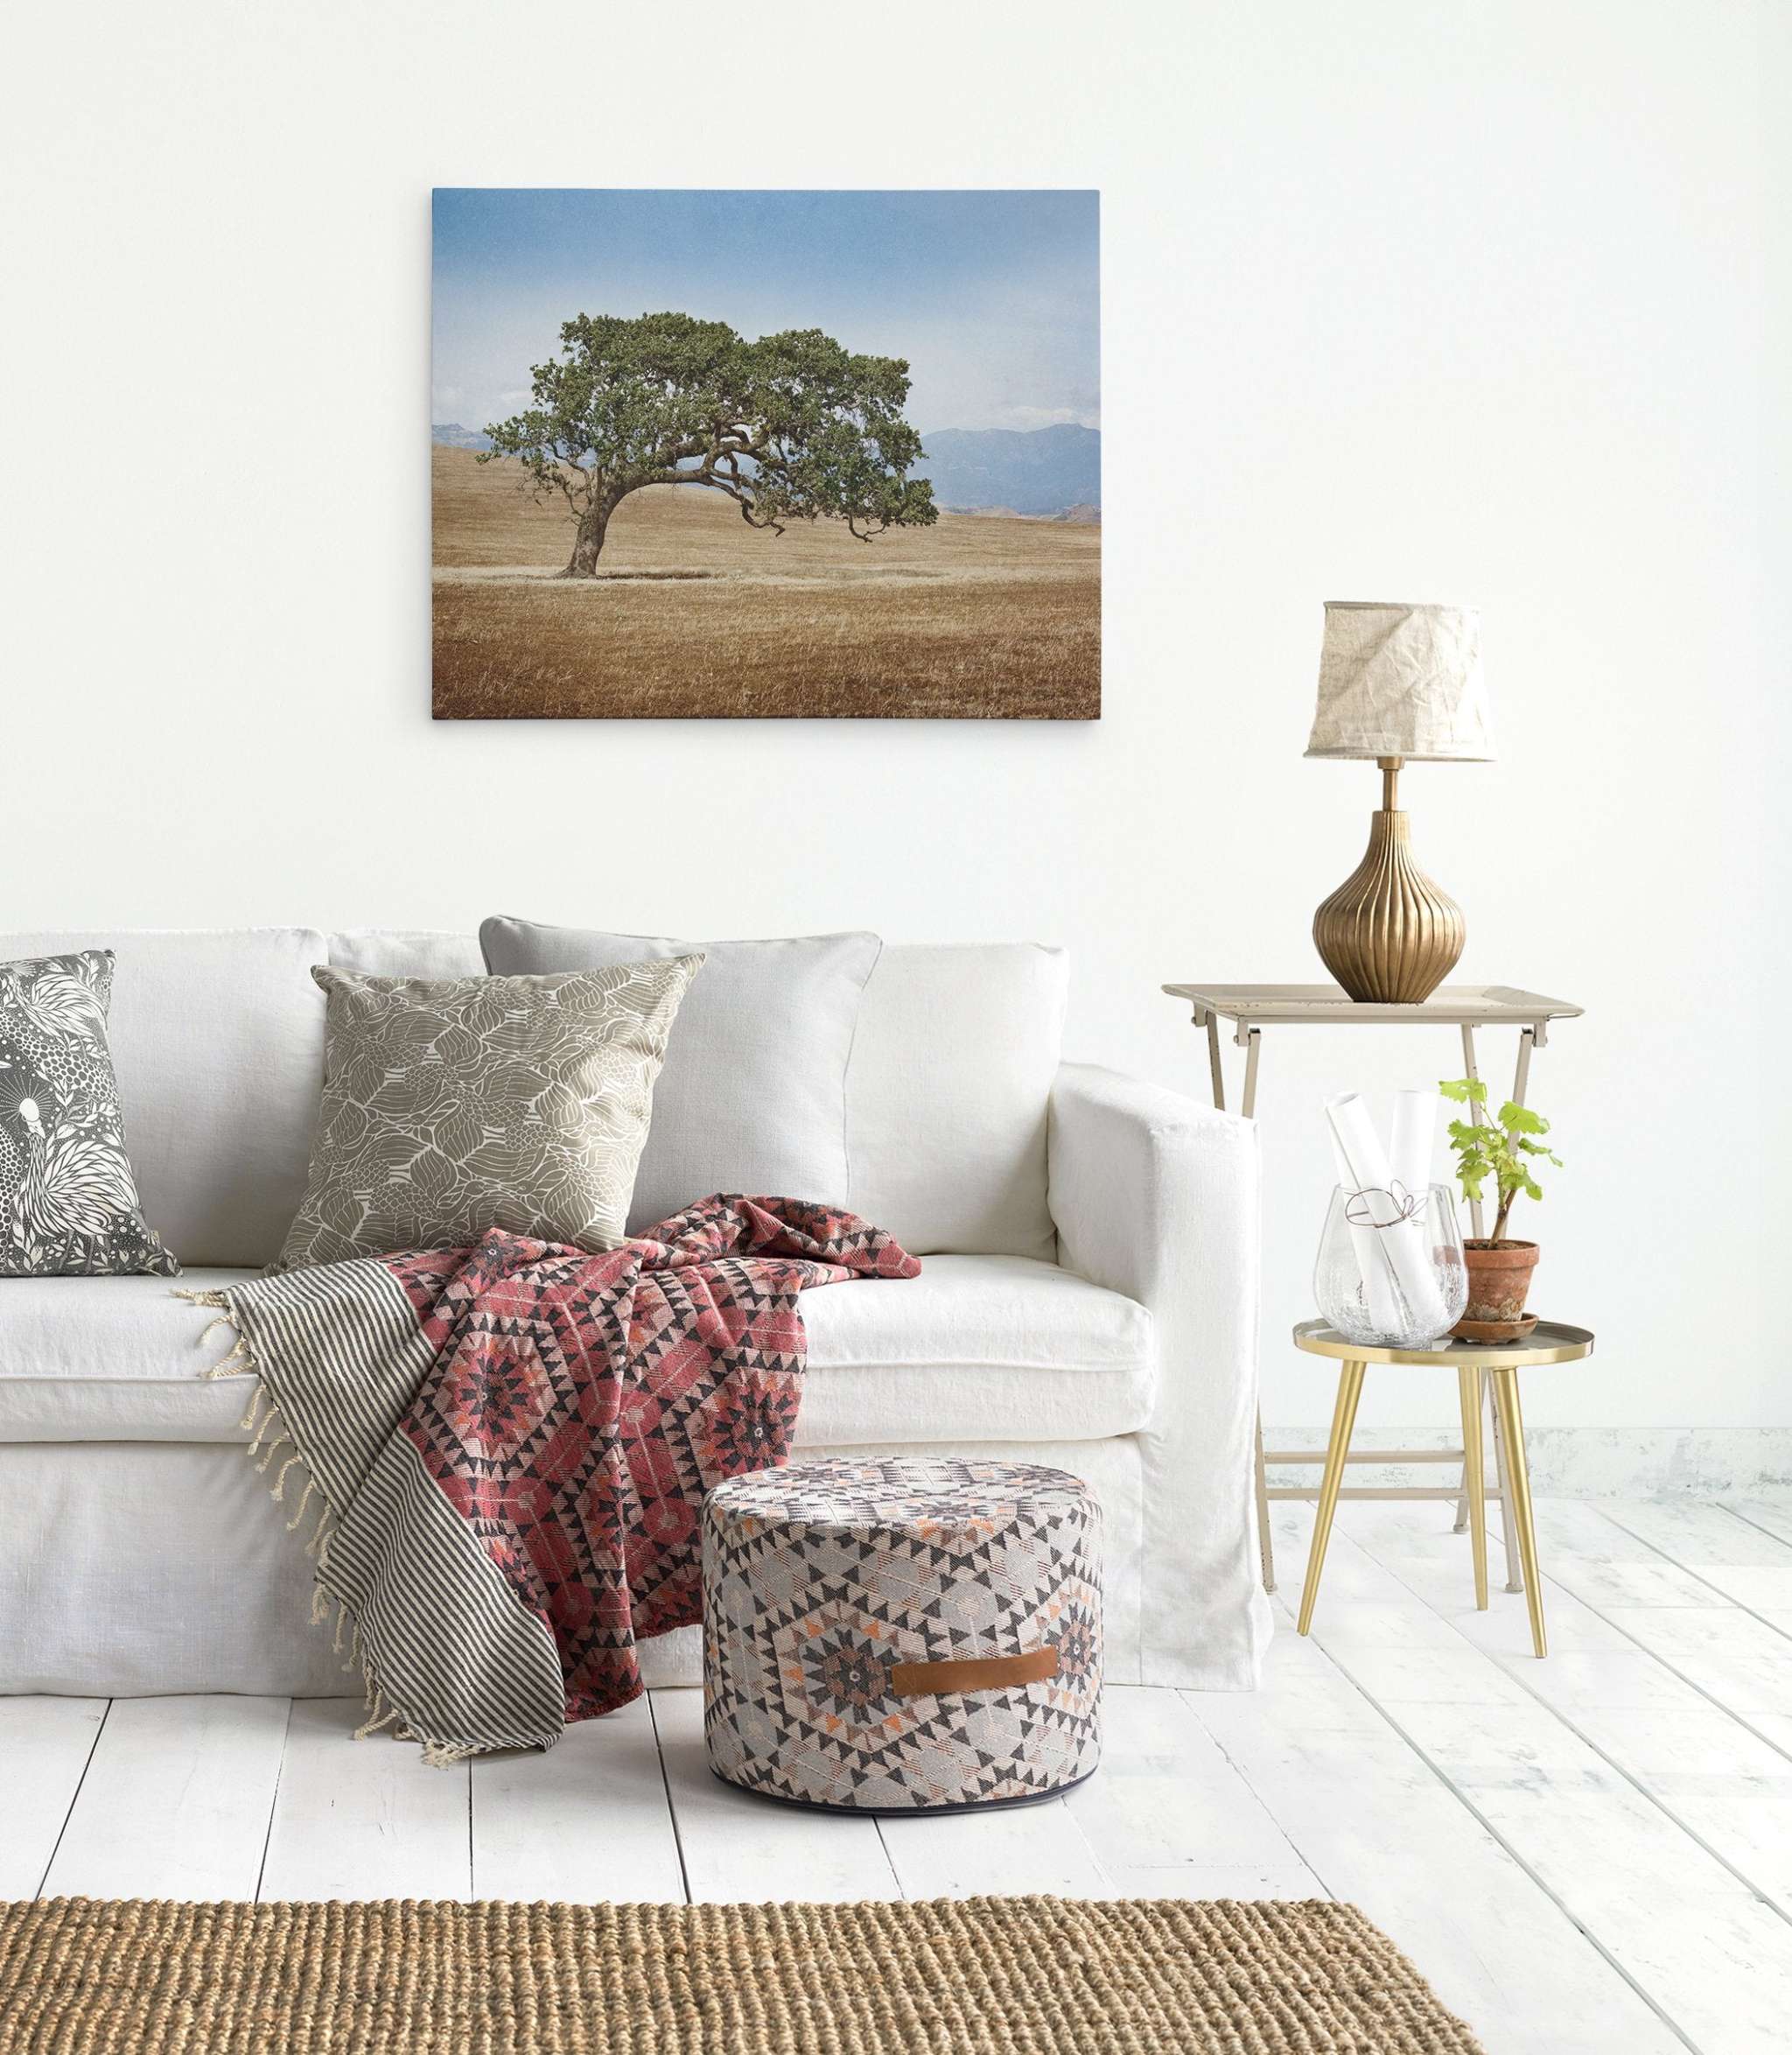 A cozy living room with a white couch adorned with patterned pillows and a colorful throw blanket. A patterned ottoman is placed in front. A side table with a plant, vase, and lamp is next to the couch. A large framed Offley Green California Landscape Wall Art, Oak Tree Canvas 'Windswept' hangs on the wall.